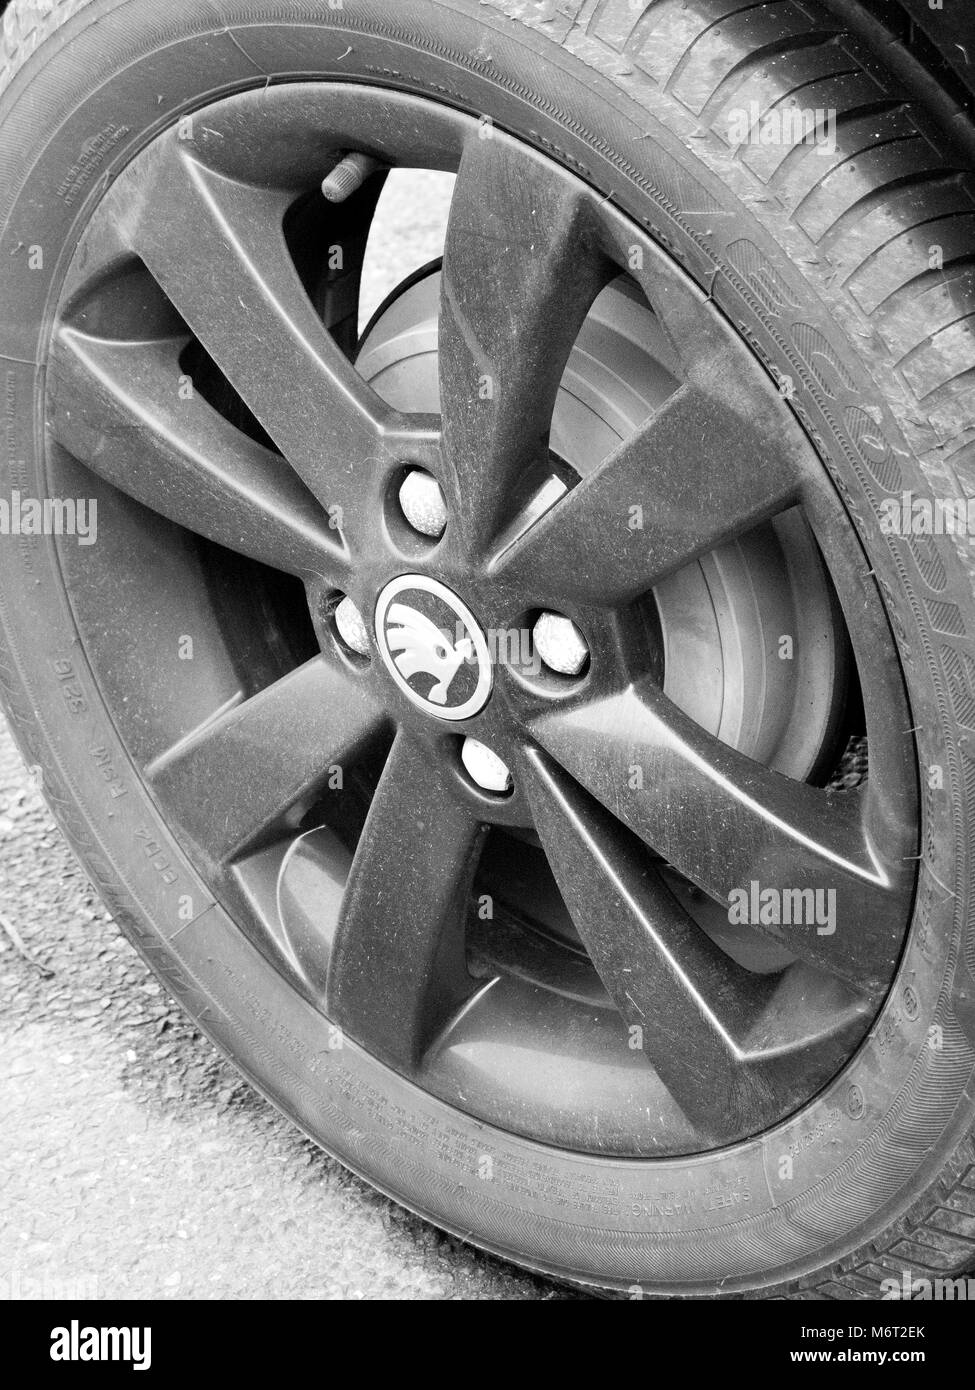 Skoda alloy wheel on four wheel drive vehicle, Czech automobile manufacturer founded in 1895 as Laurin & Klement Stock Photo